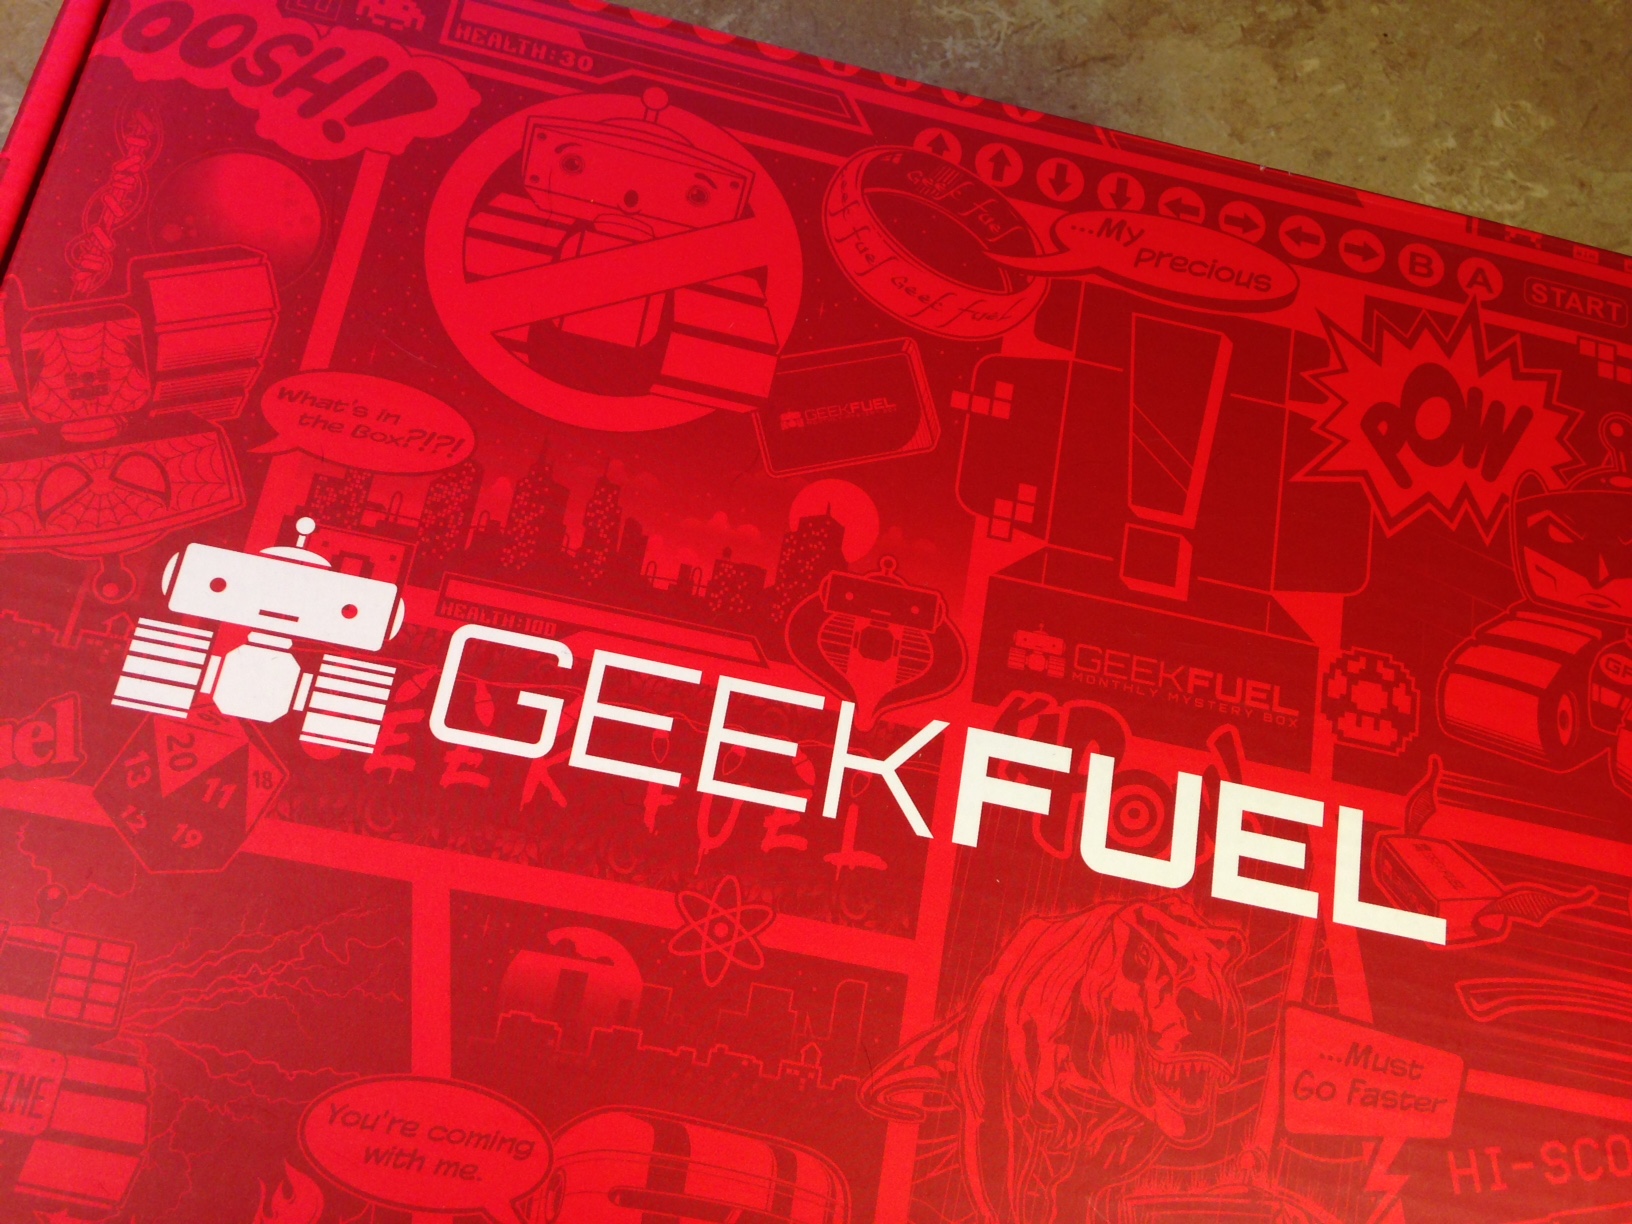 Geek insider, geekinsider, geekinsider. Com,, unboxing the xl geek fuel box + $3 off next purchase, culture, geek life